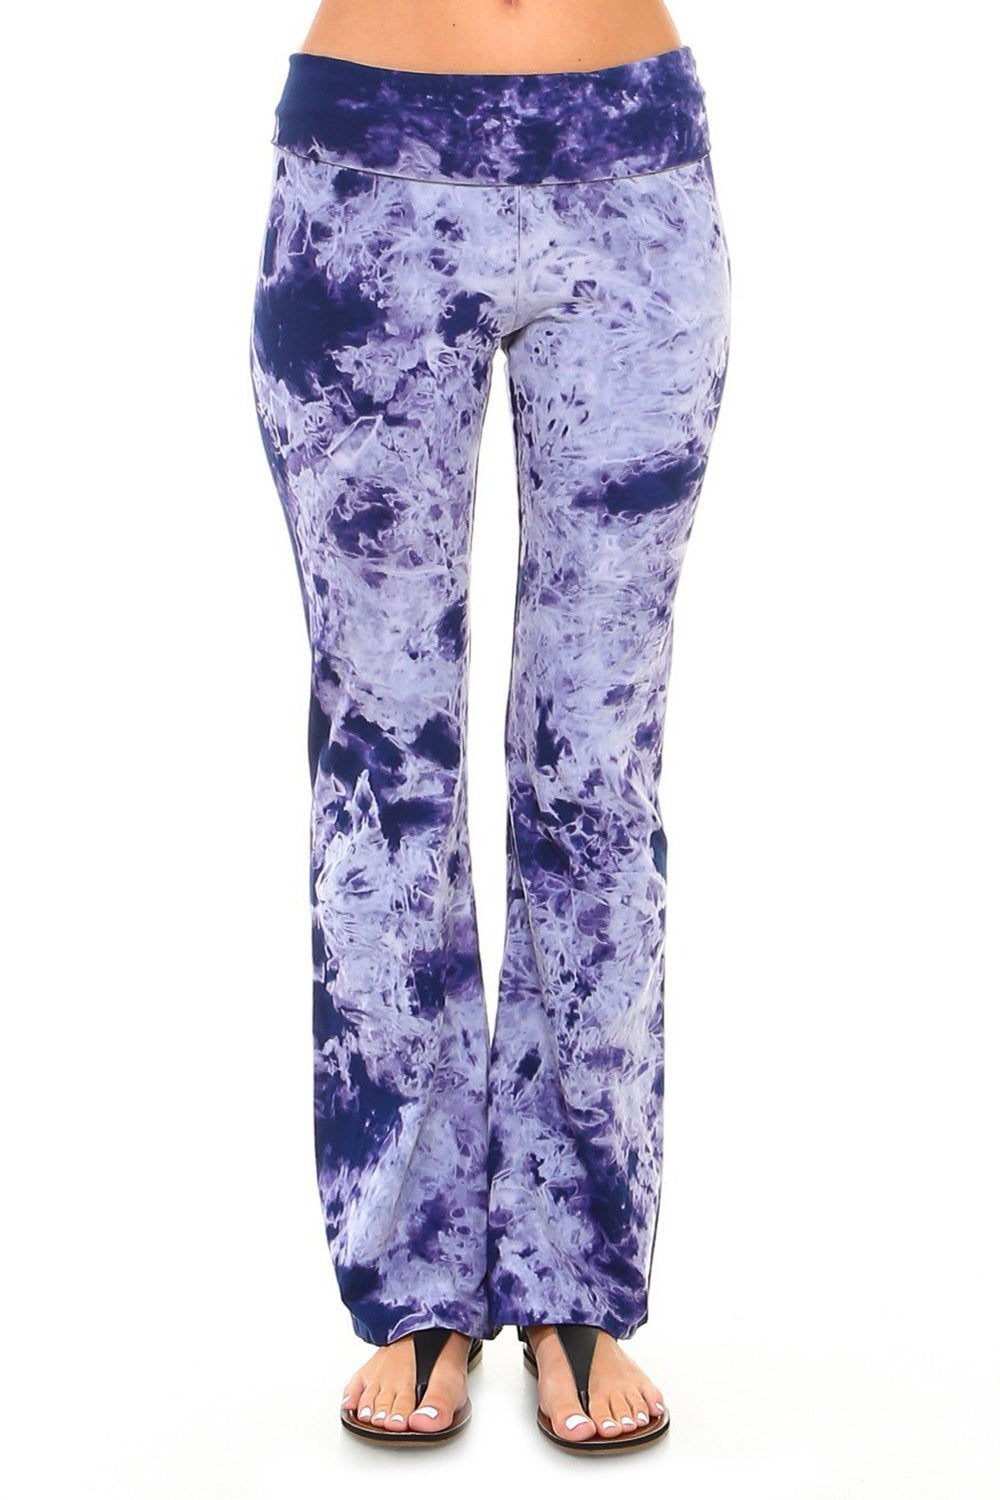 Front Side Urban X Navy & Purple Bamboo Tie dye Straight Leg Yoga Pant with Banded waist